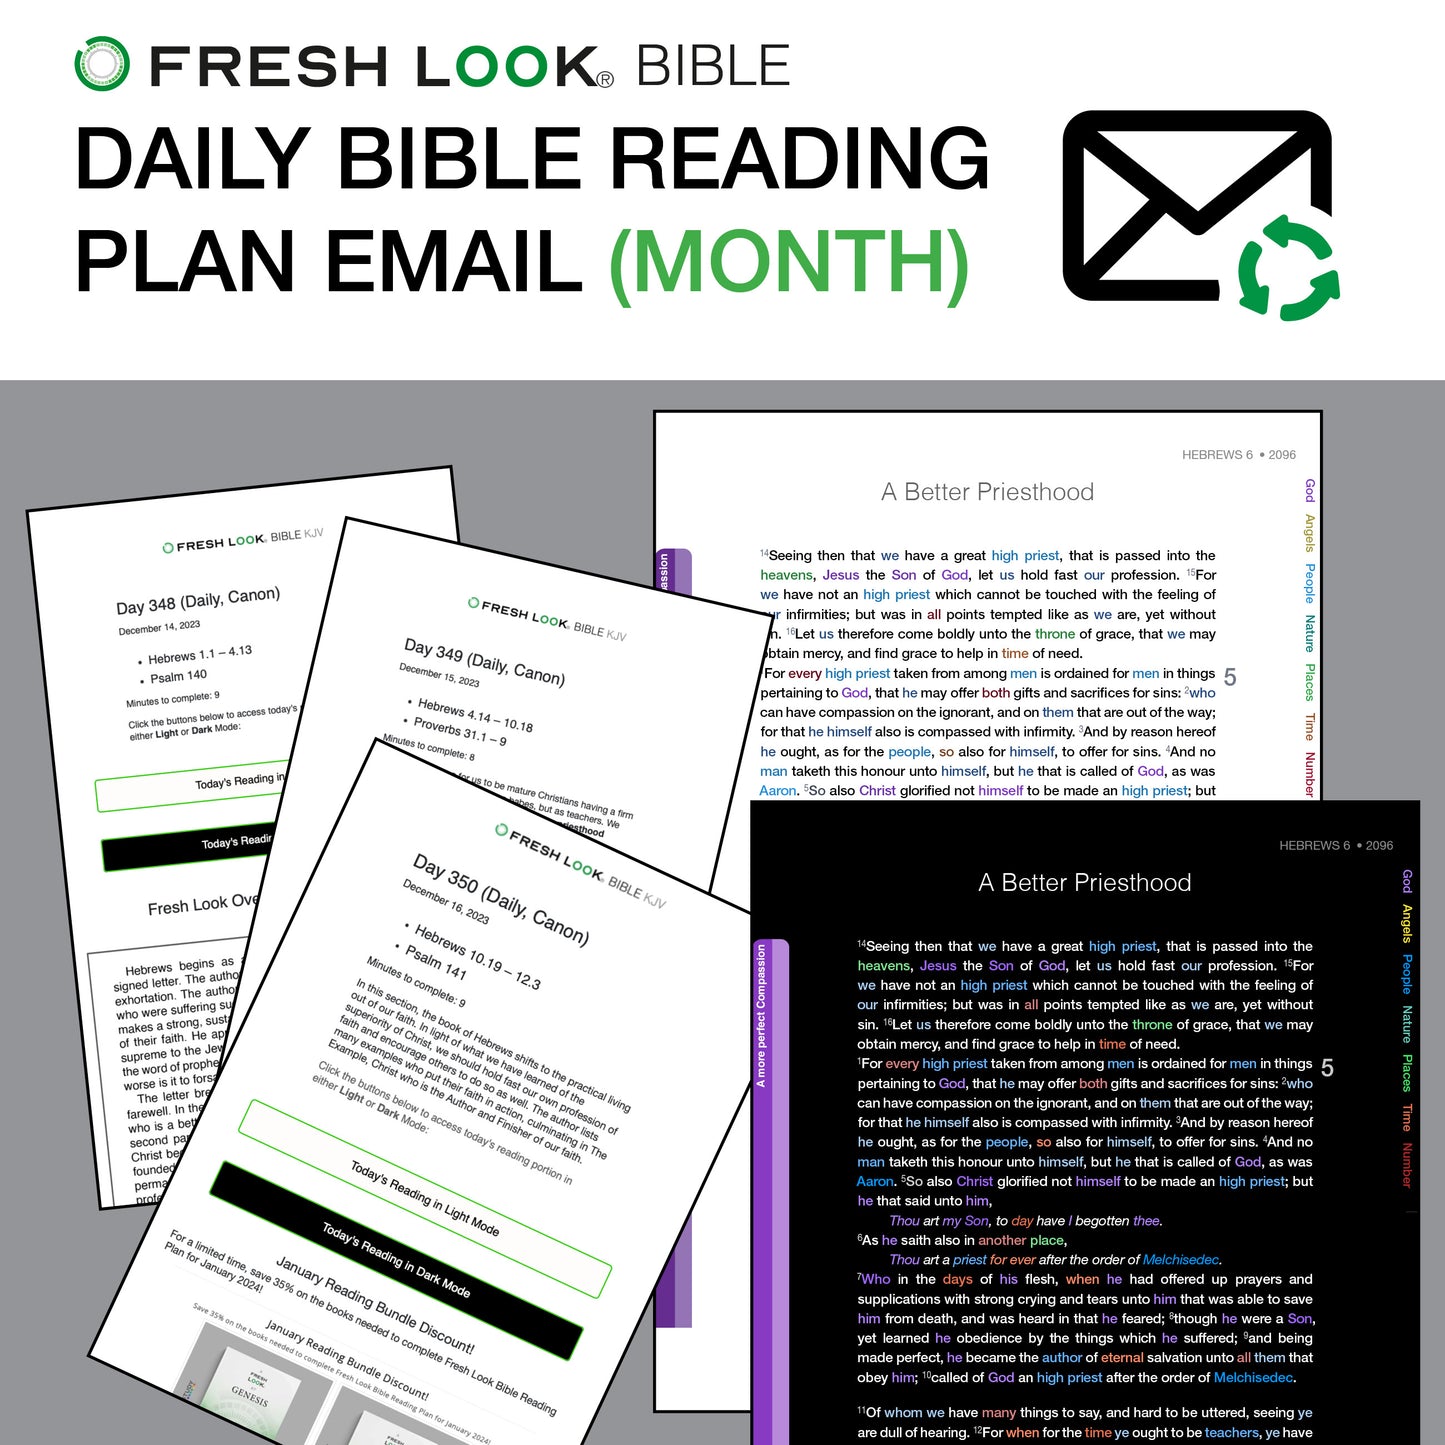 Daily Bible Reading Plan Email [Month]